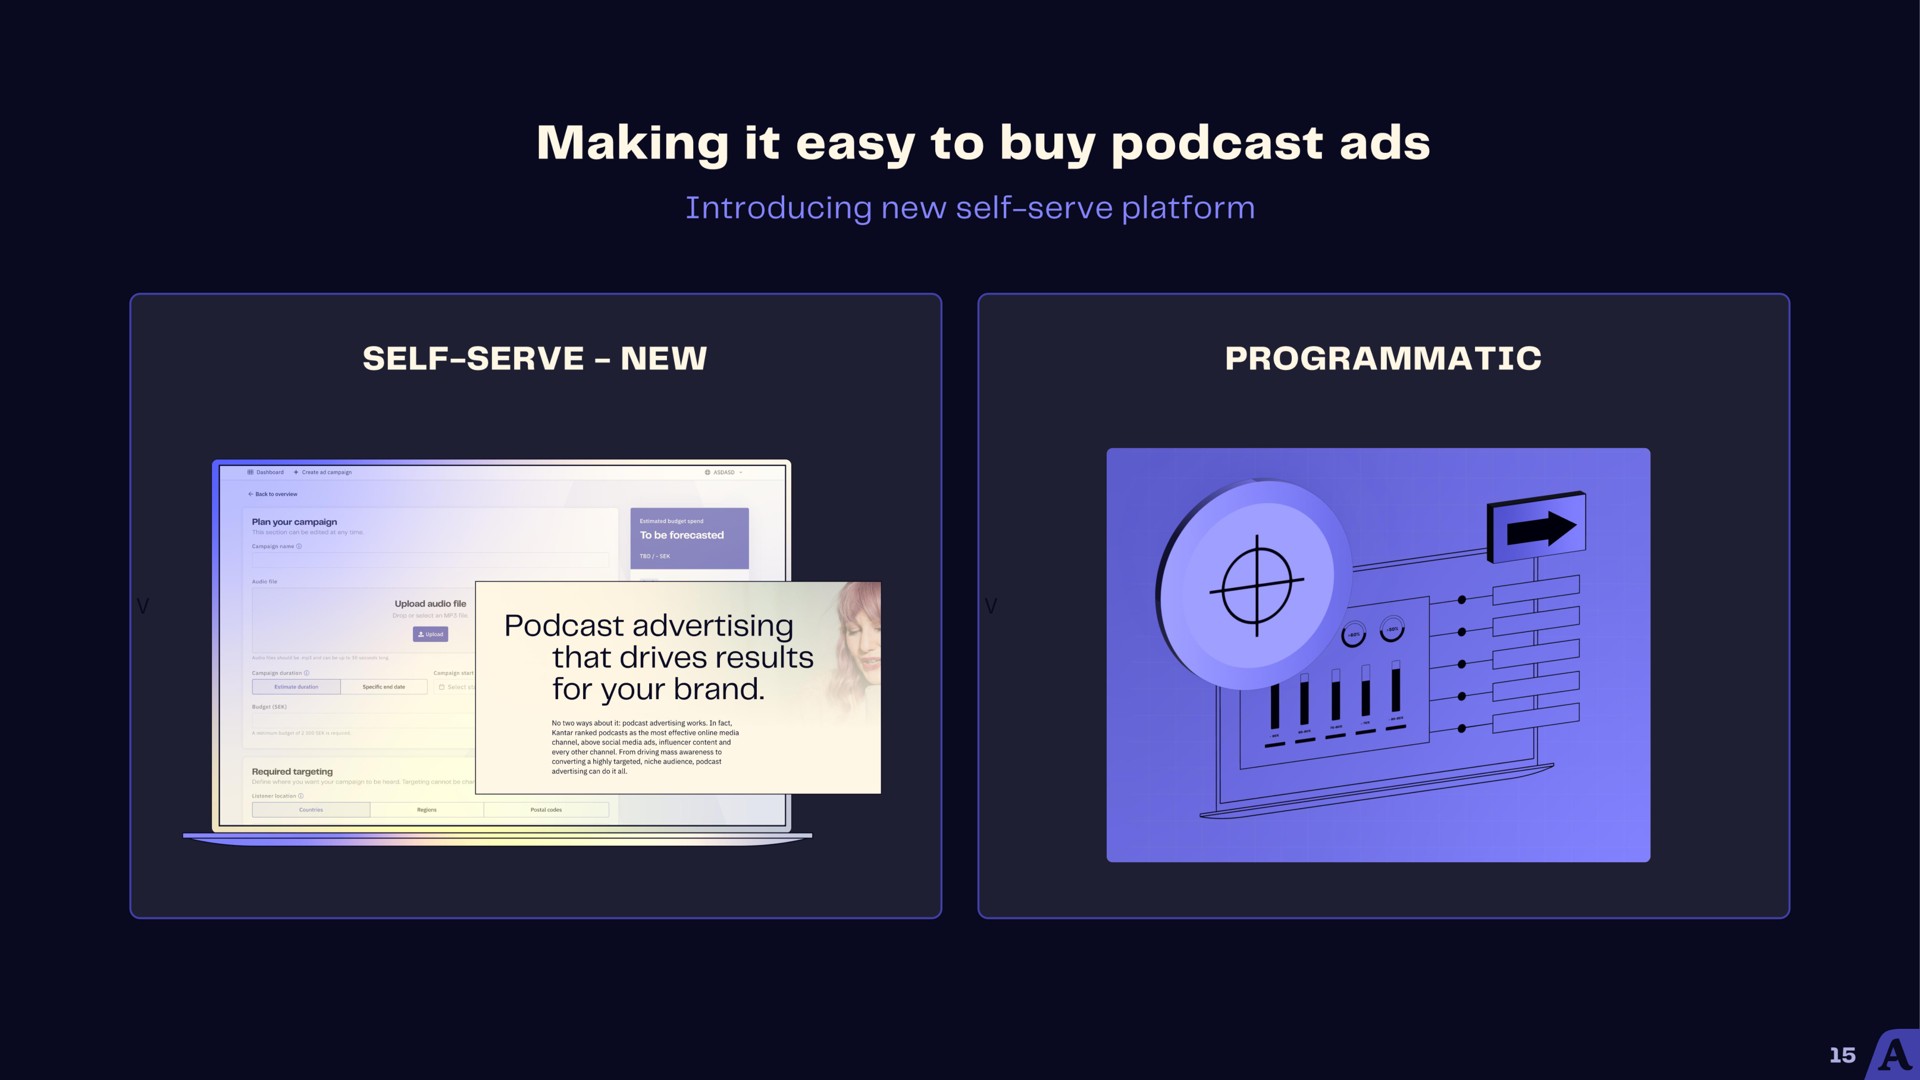 making it easy to buy ads | Acast